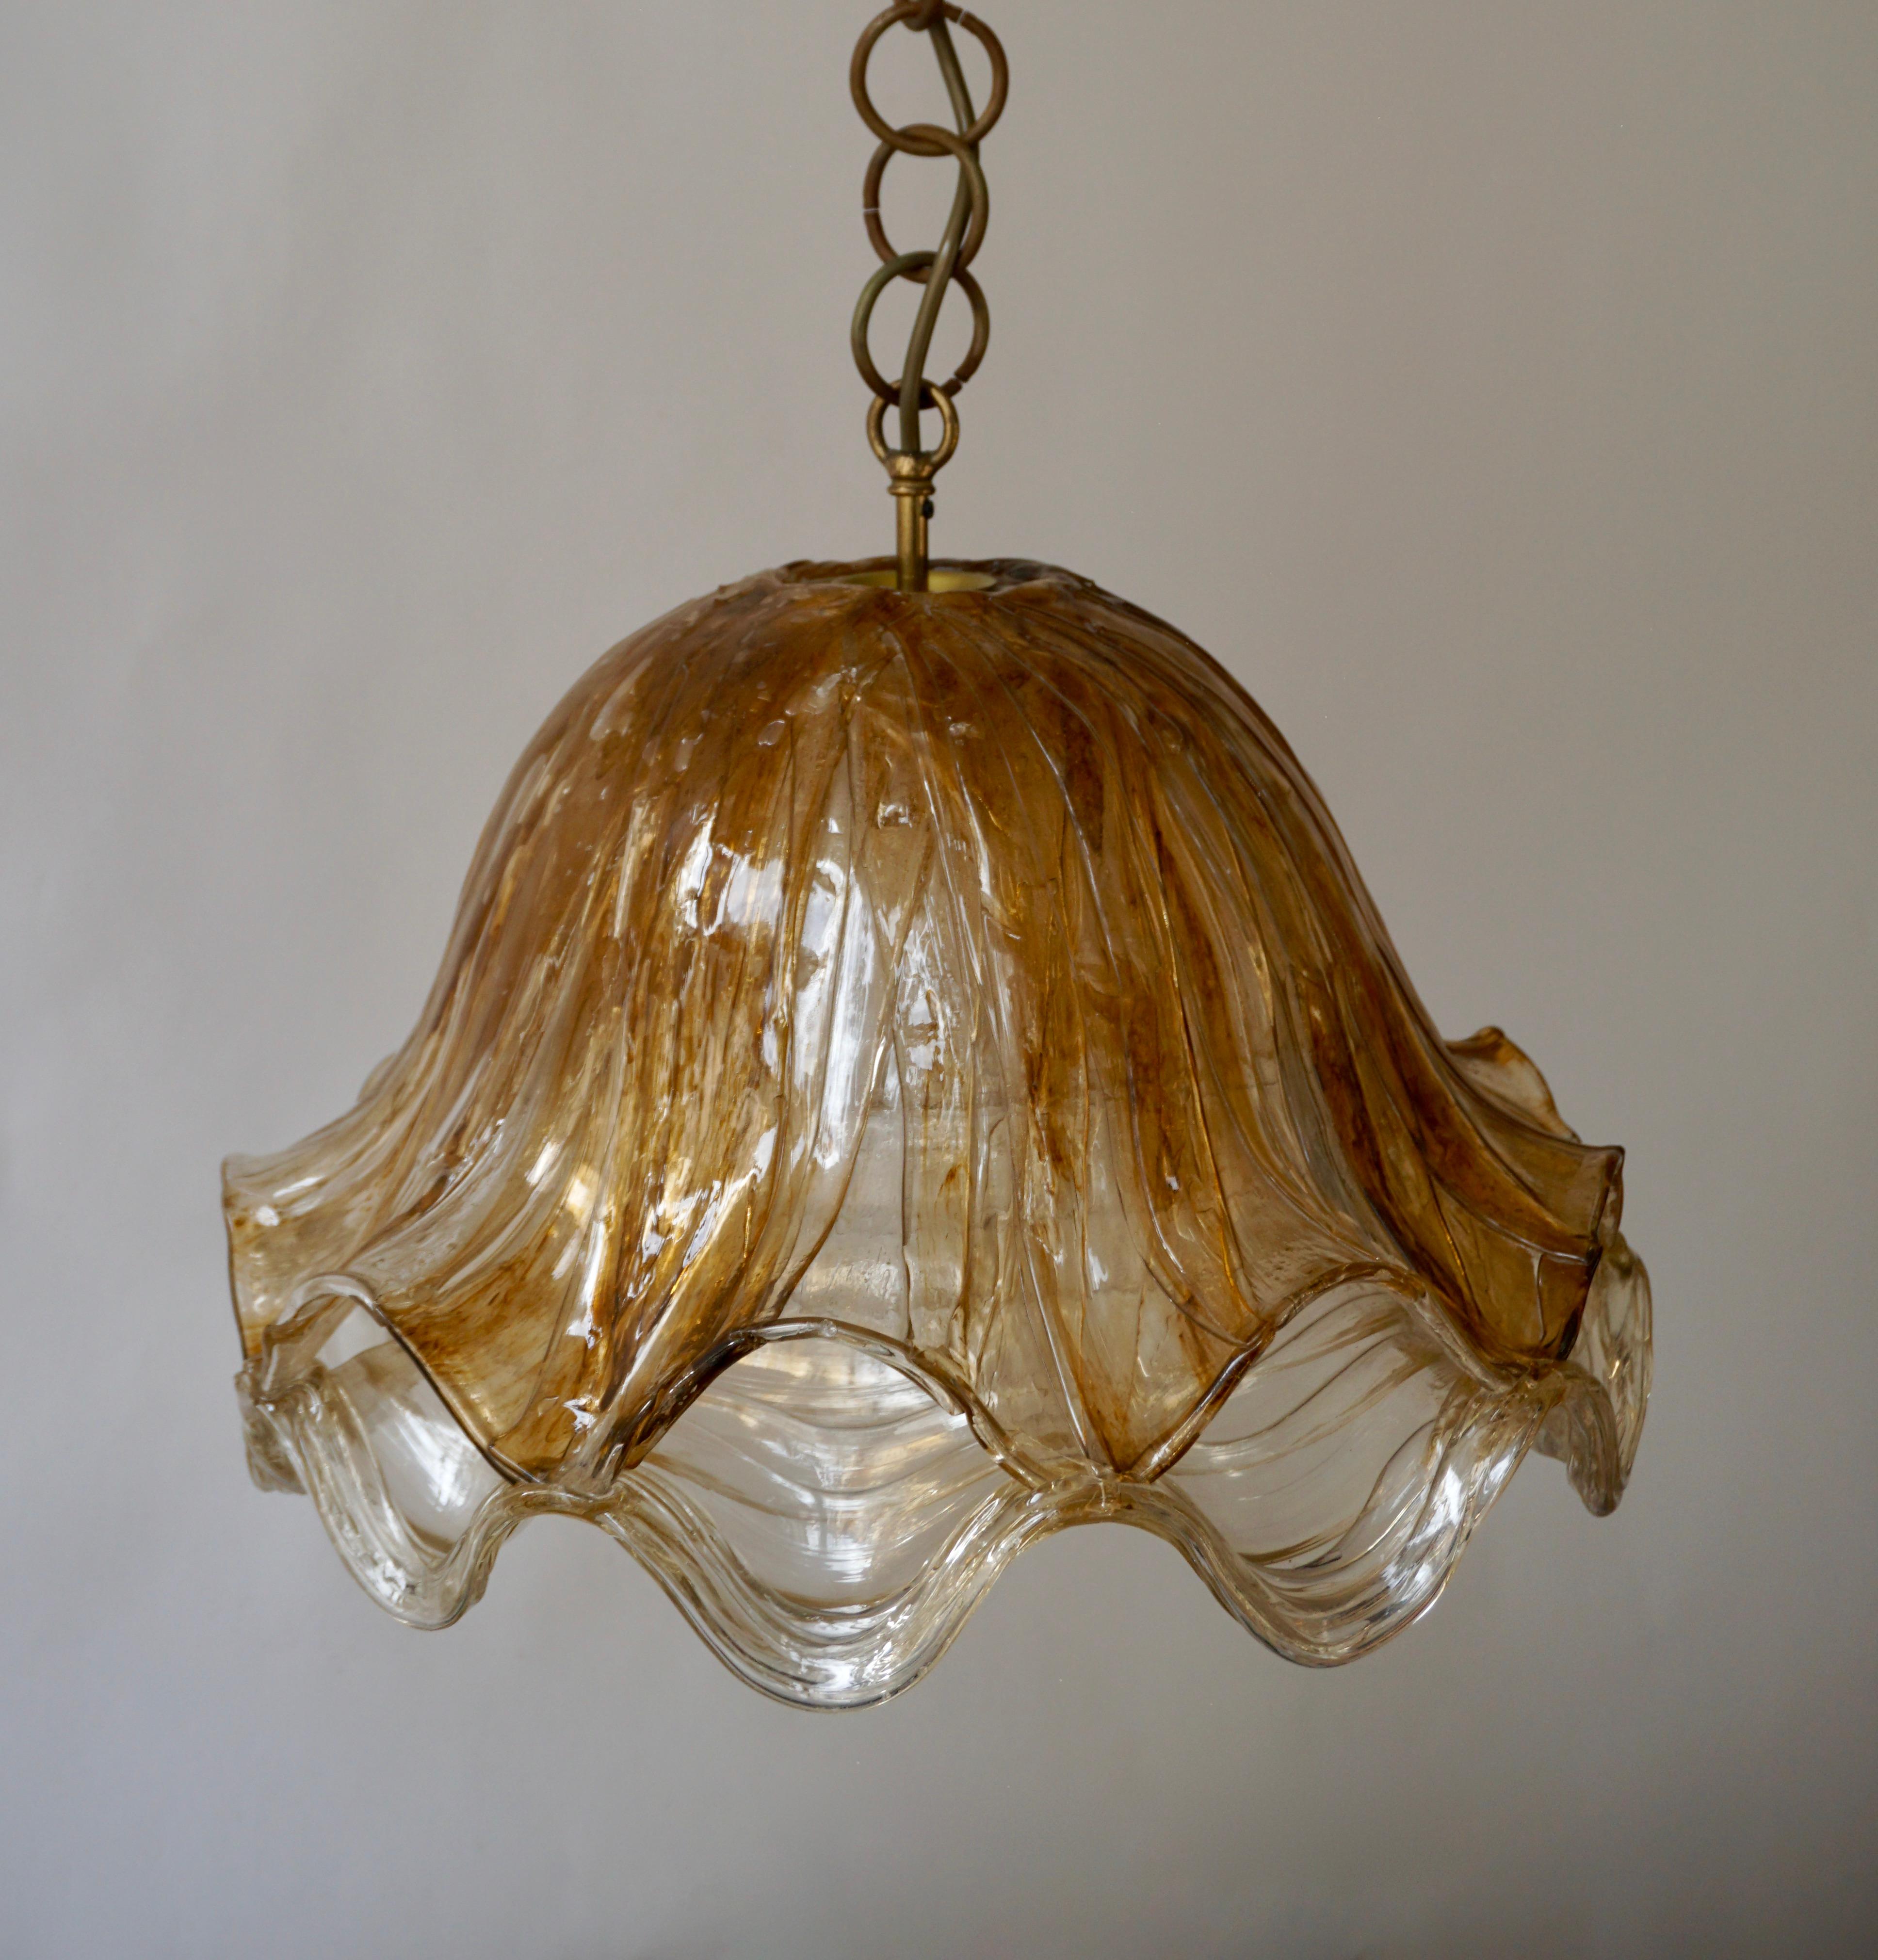 Brown and Transparent Acrylic Pendant Lamp, 1970s For Sale 2